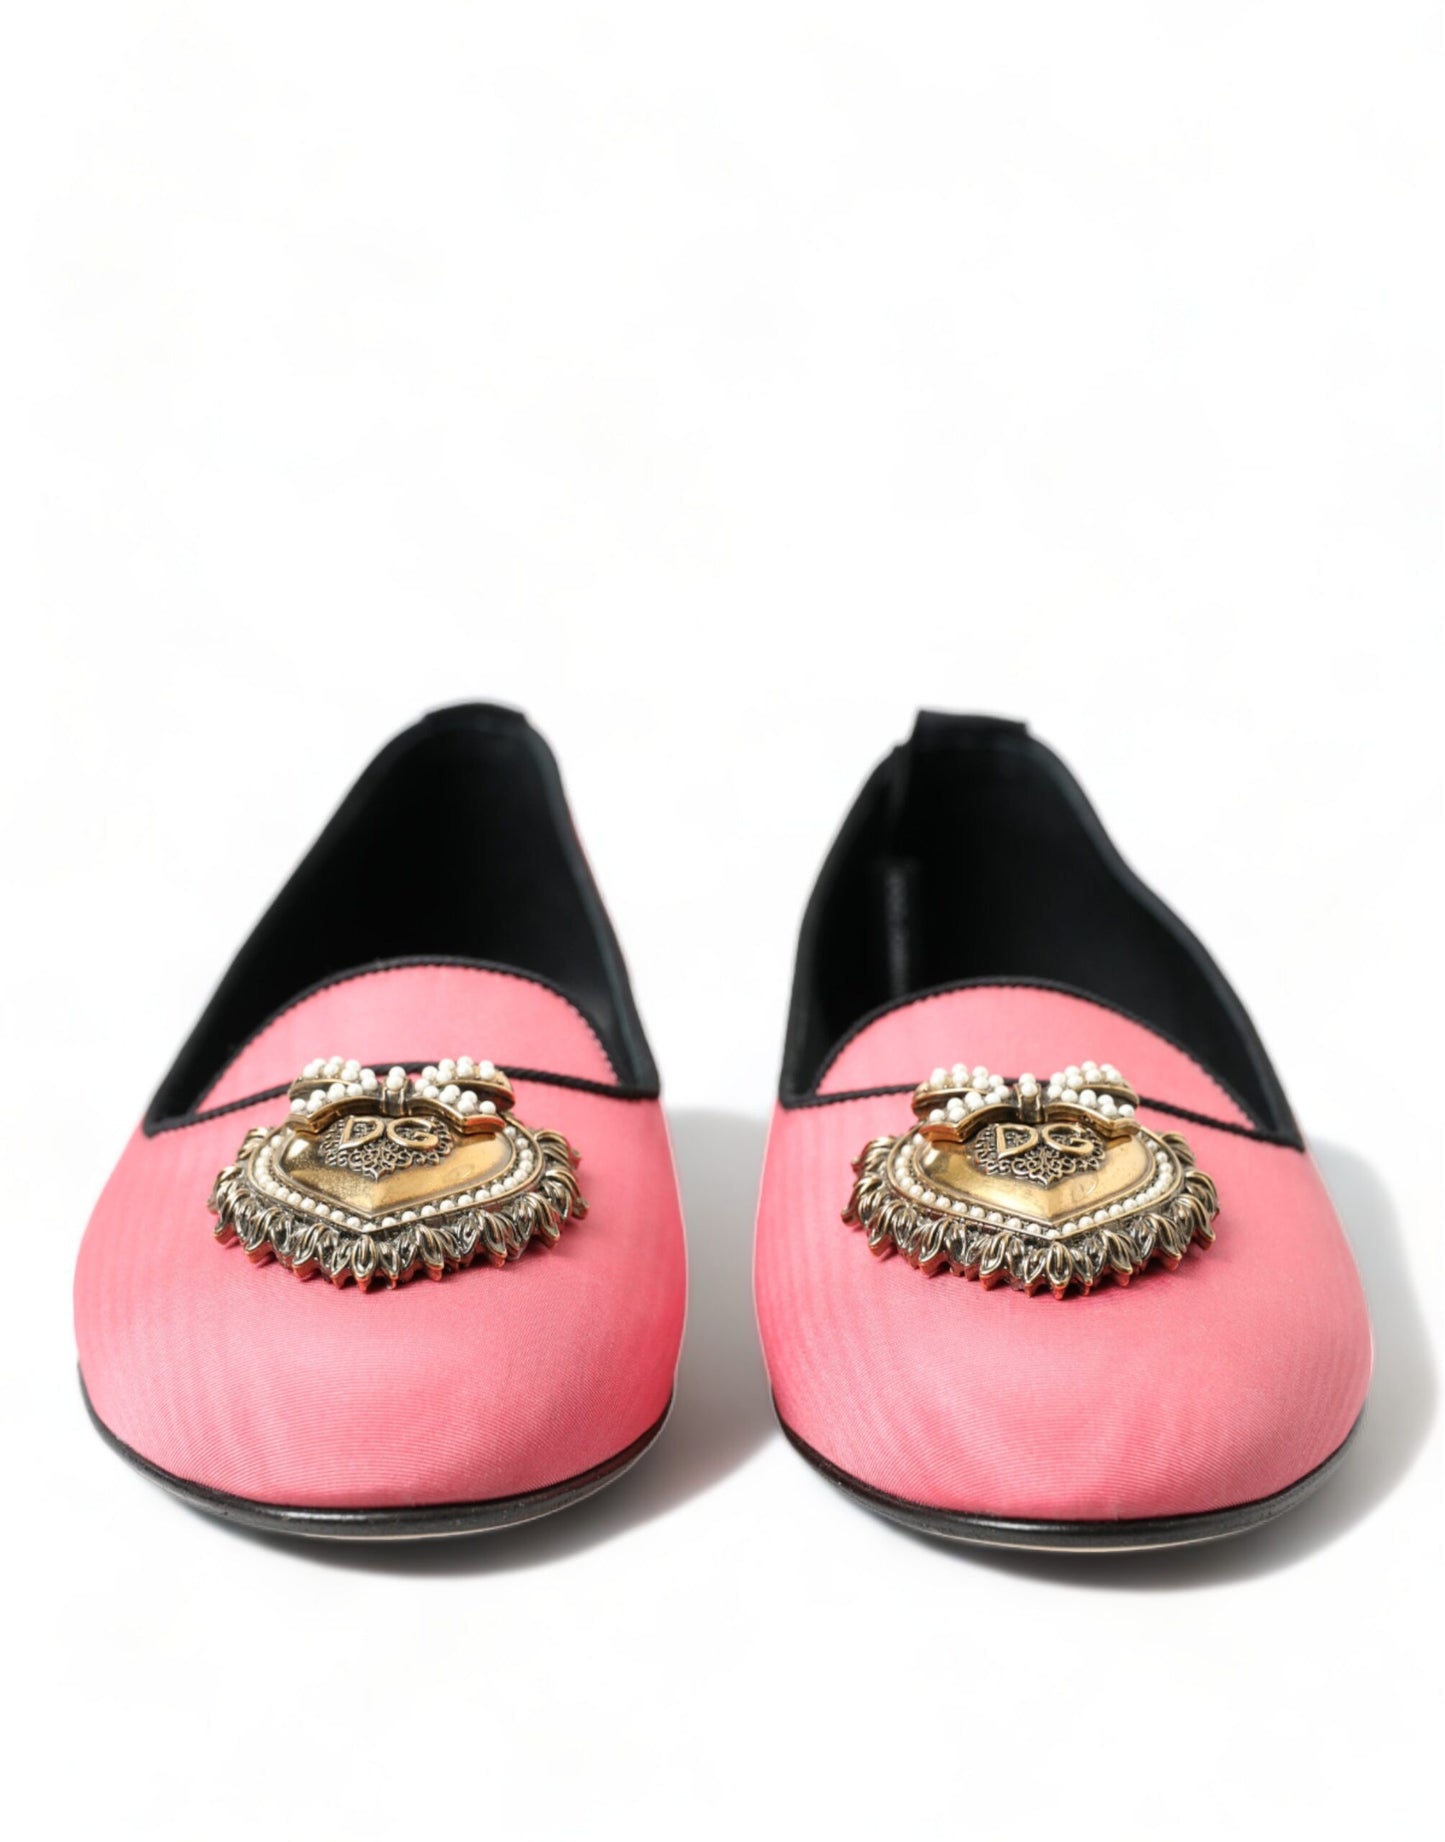 Dolce & Gabbana Elegant Moiré Audrey Slippers with Bejeweled Heart